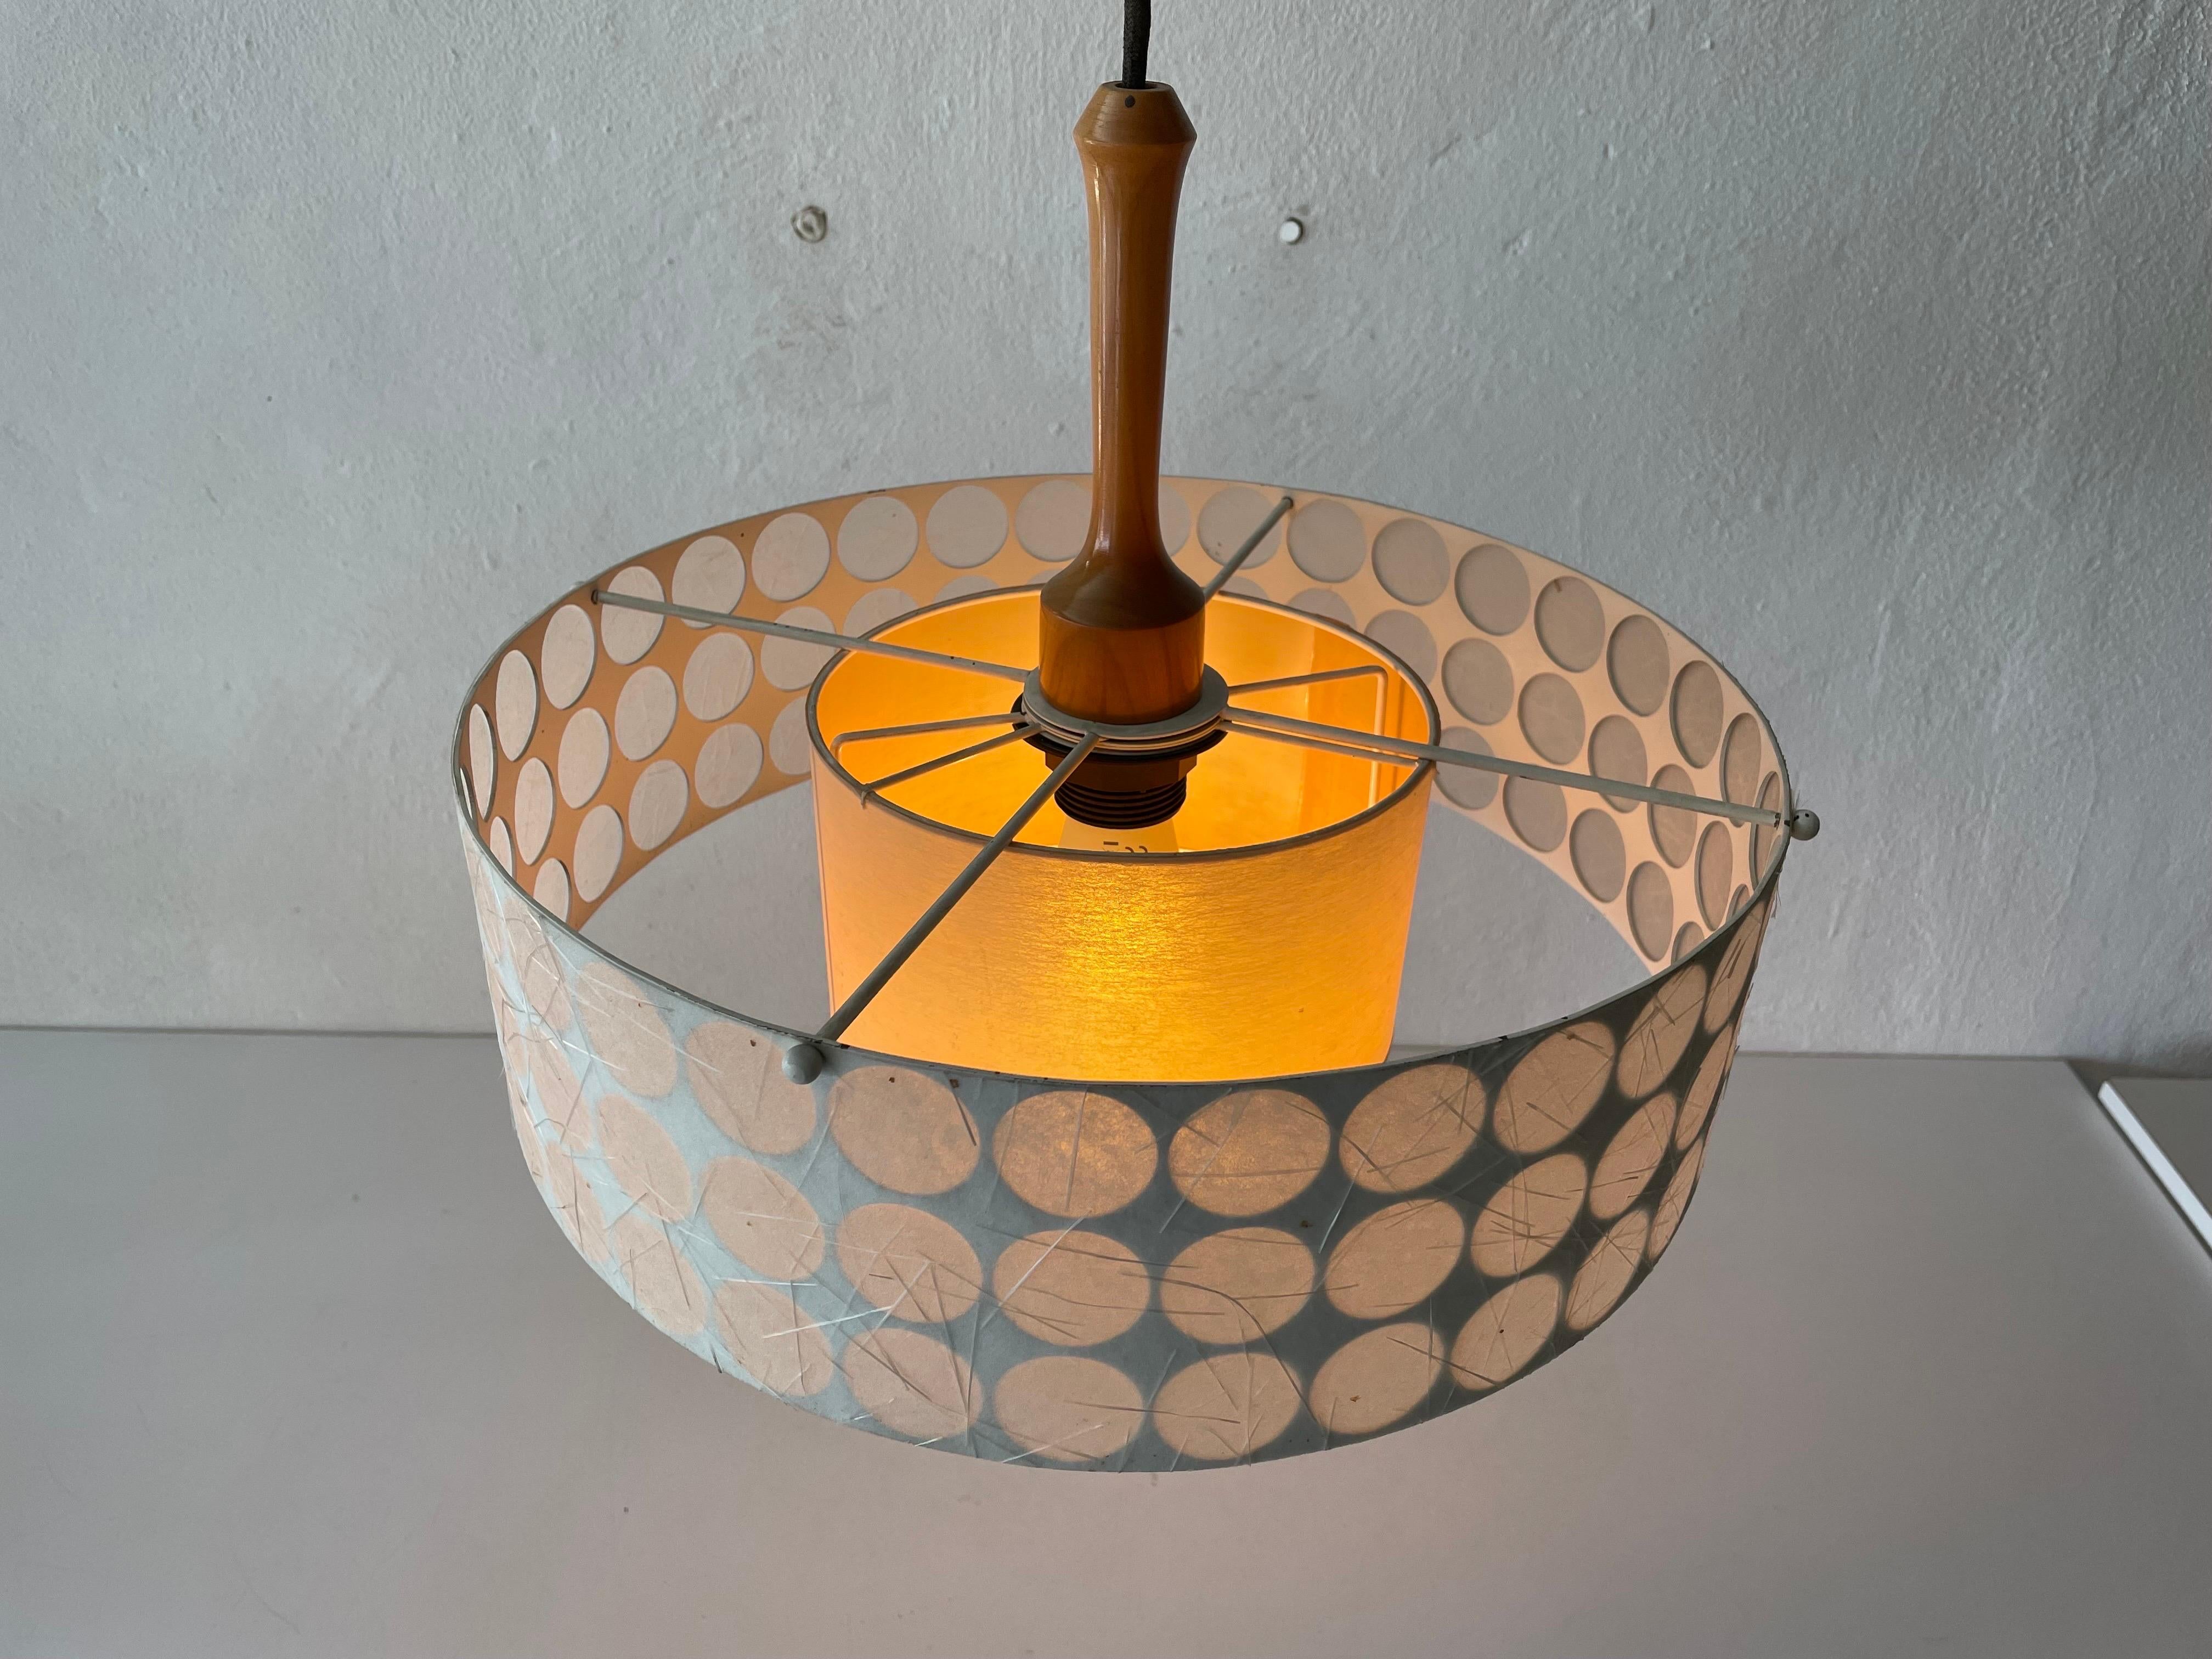 Rare Atomic Shade Pendant Lamp by Temde, 1960s, Switzerland For Sale 5